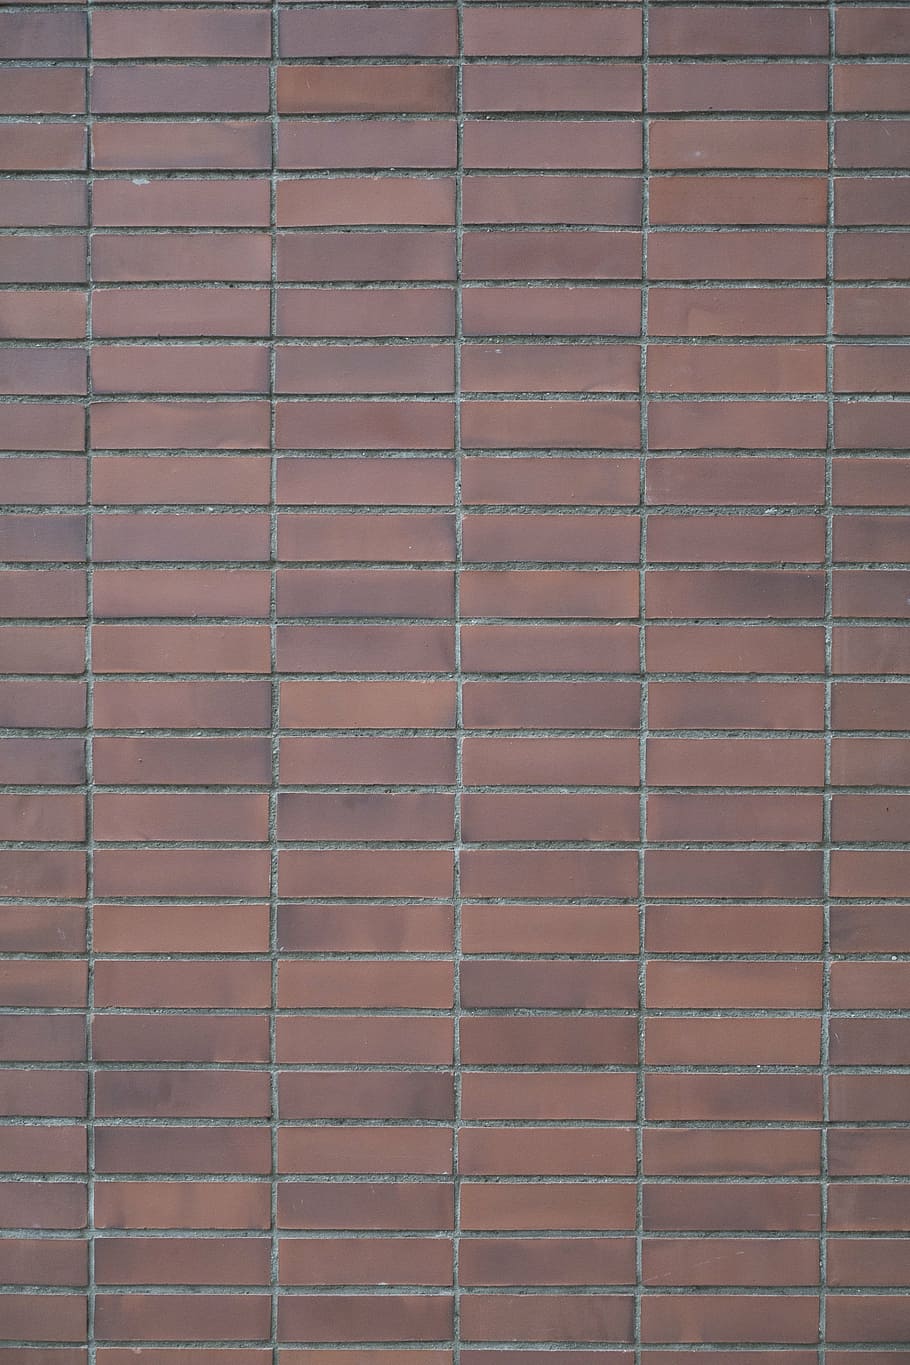 brick, texture, imo joint, wall, background, brown, full frame, backgrounds, pattern, built structure